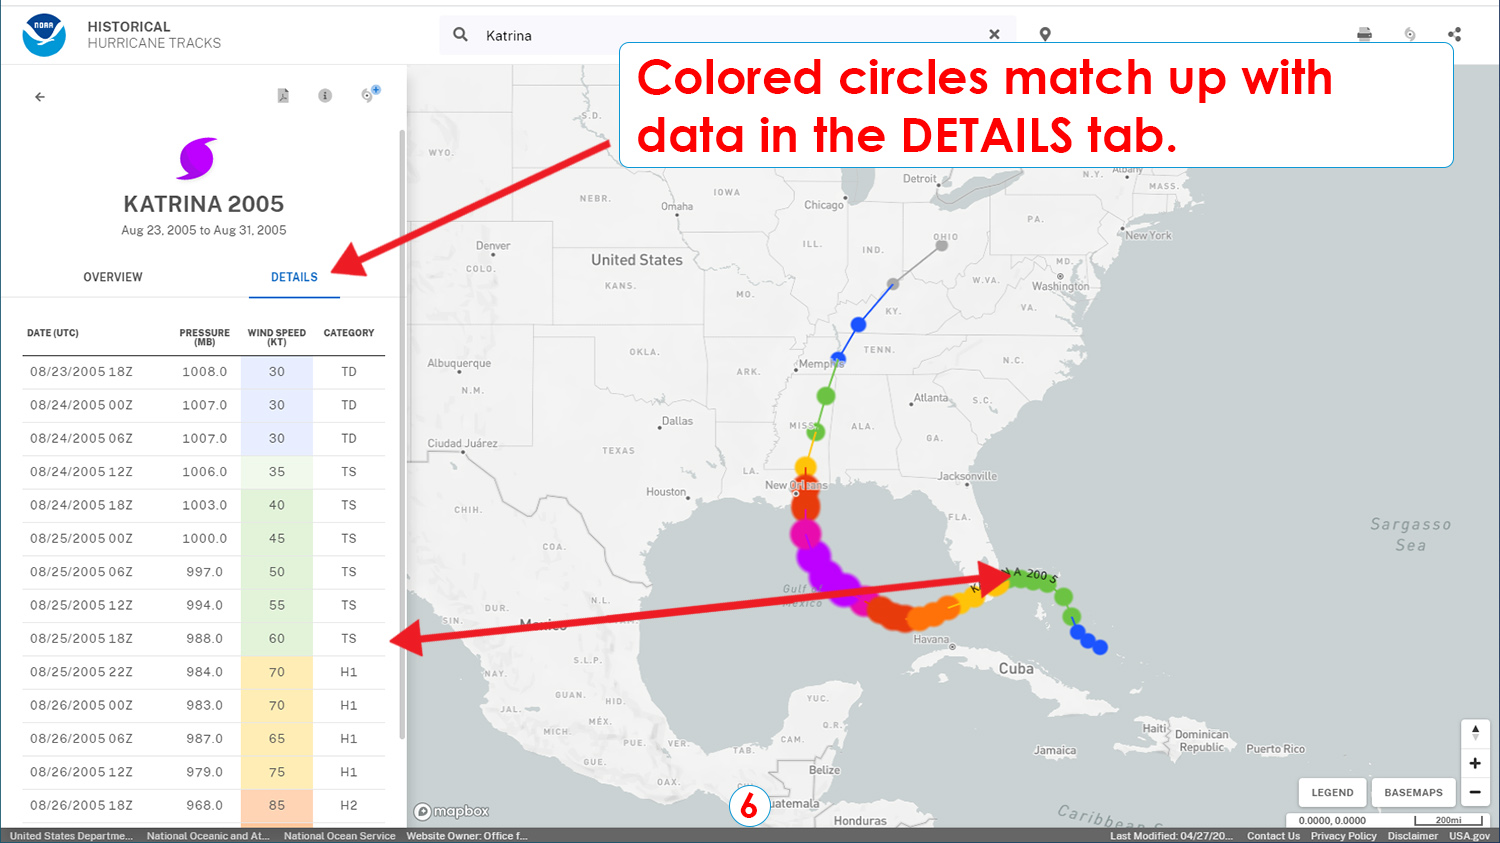 Step 6: Colored circles match up with data in the DETAILS tab.